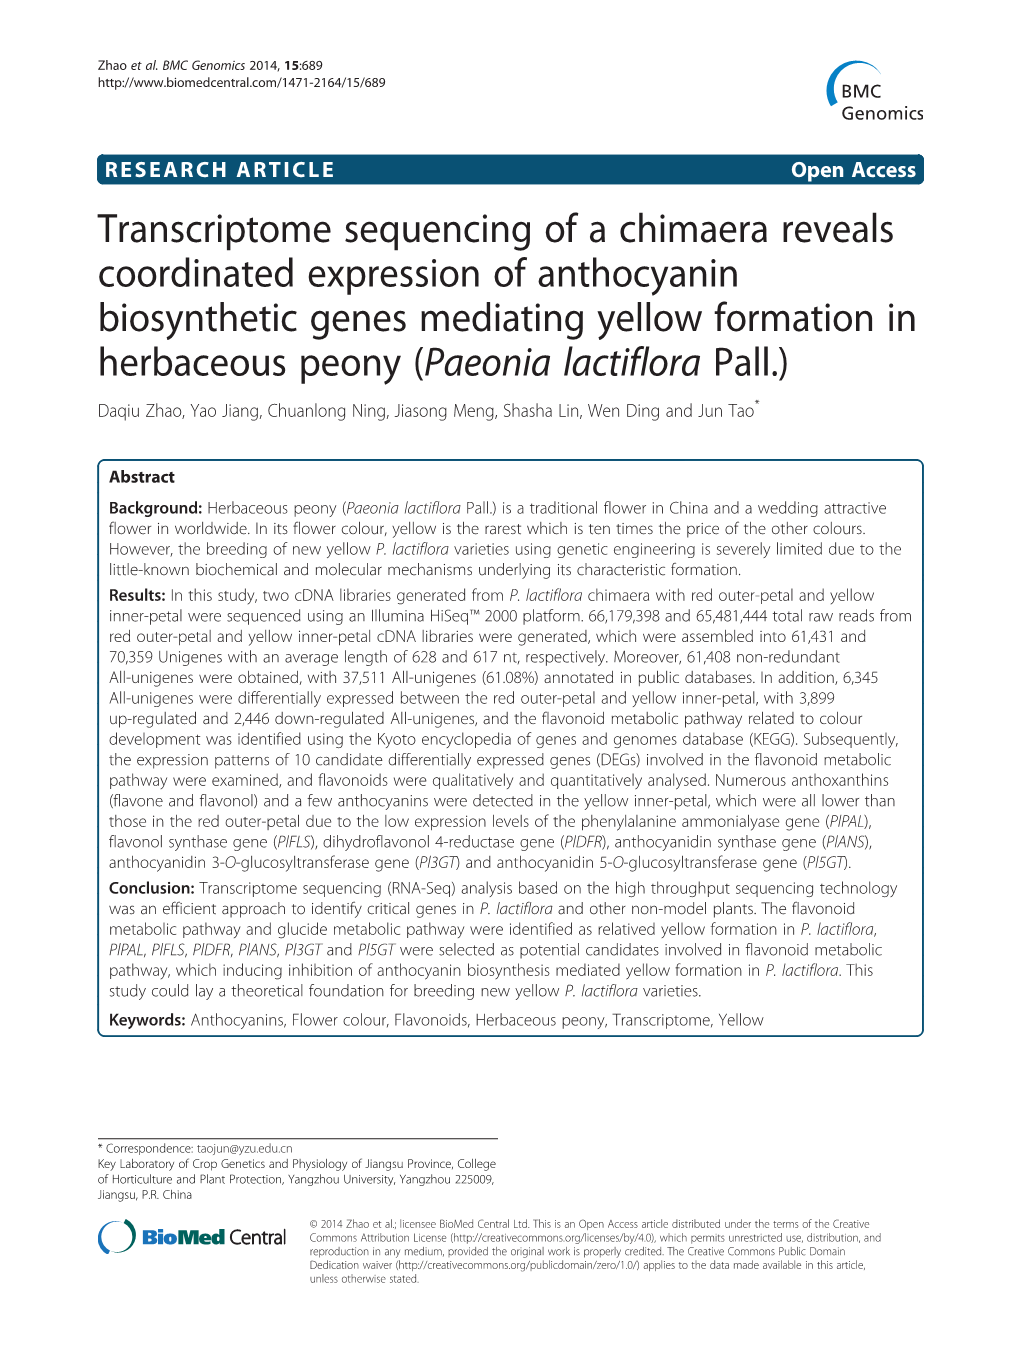 Transcriptome Sequencing of a Chimaera Reveals Coordinated Expression of Anthocyanin Biosynthetic Genes Mediating Yellow Formati